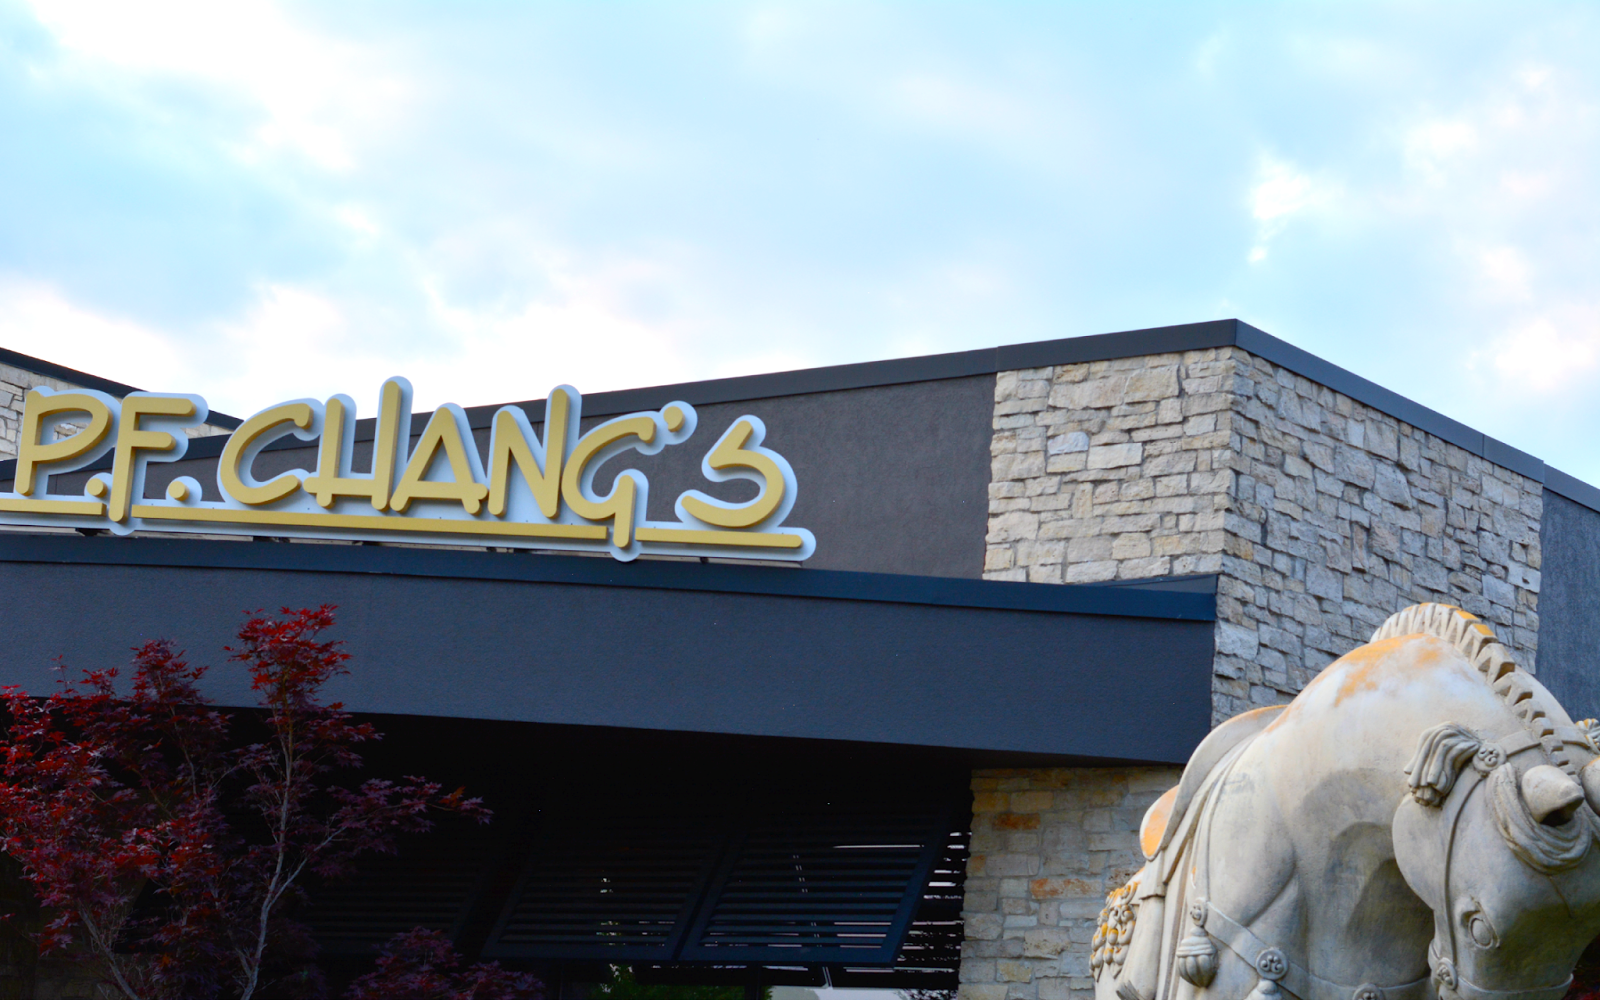 p.f. chang's in northbrook illinois chicago